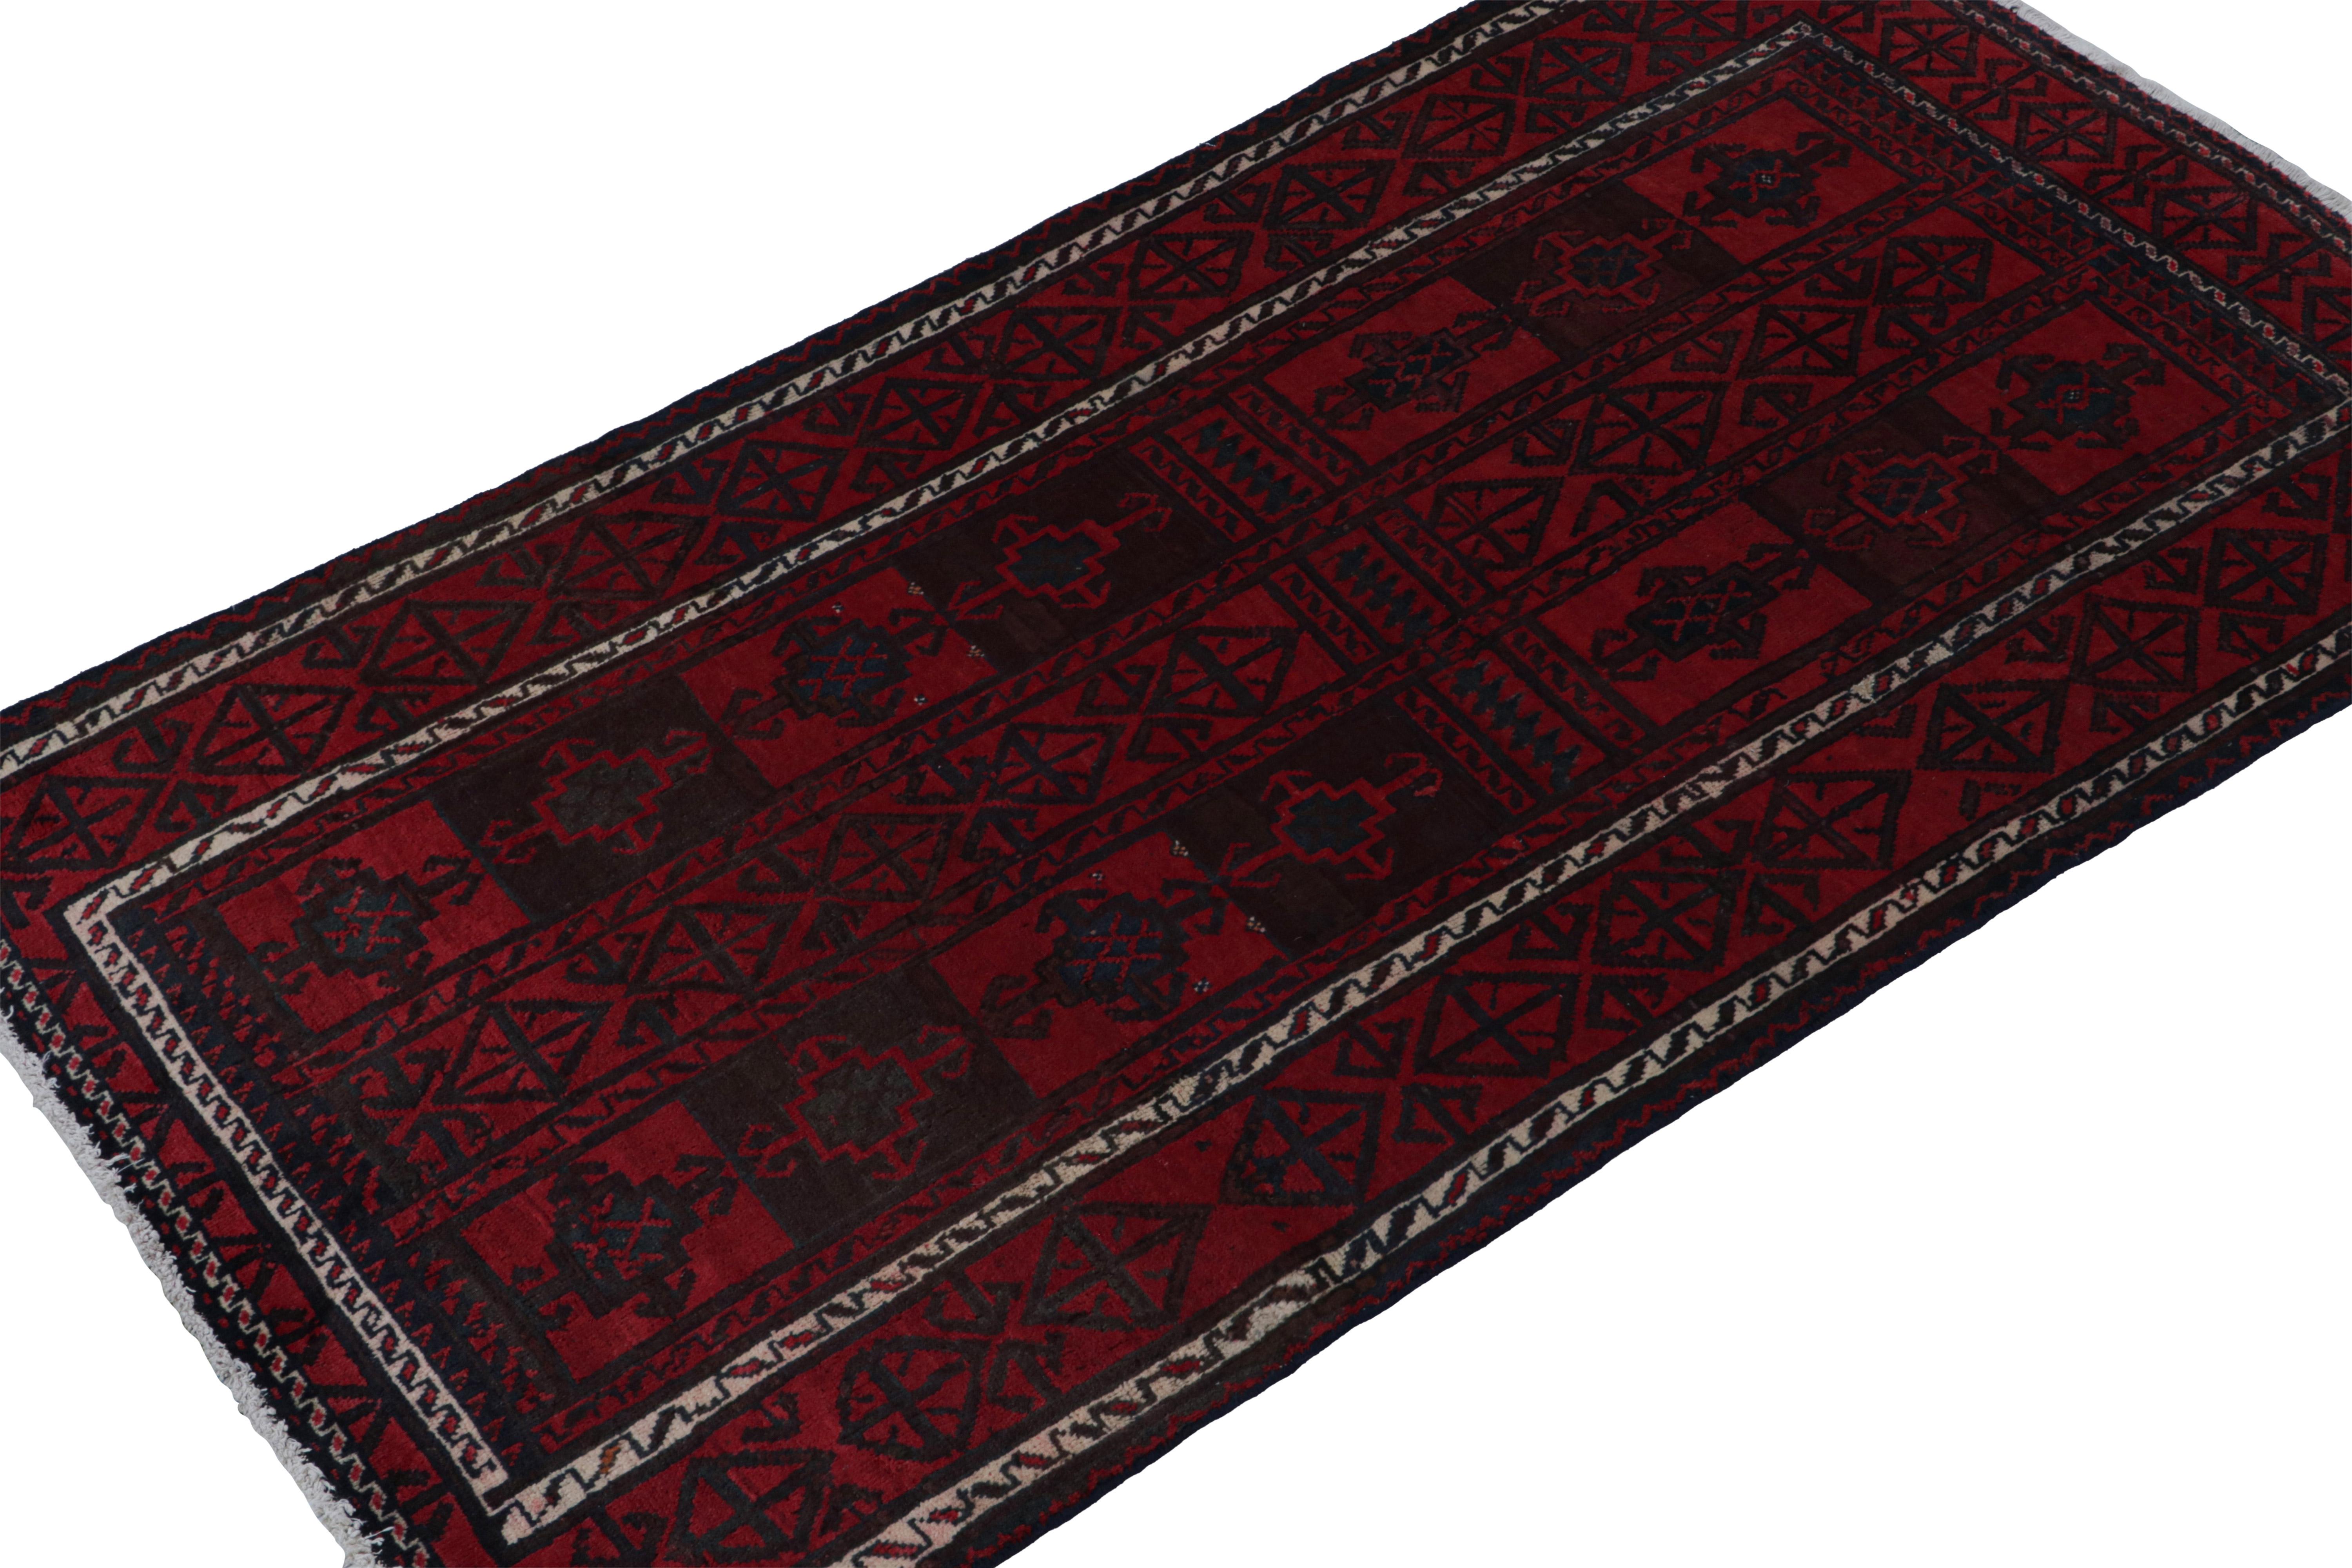 Hand-knotted in wool & goat hair circa 1950-1960, this 4x7 vintage Baluch rug is a new curation from Rug & Kilim. 

On the Design: 

Named for the same nomadic weavers, this tribal rug enjoys sharply drawn geometric patterns in rich red and navy